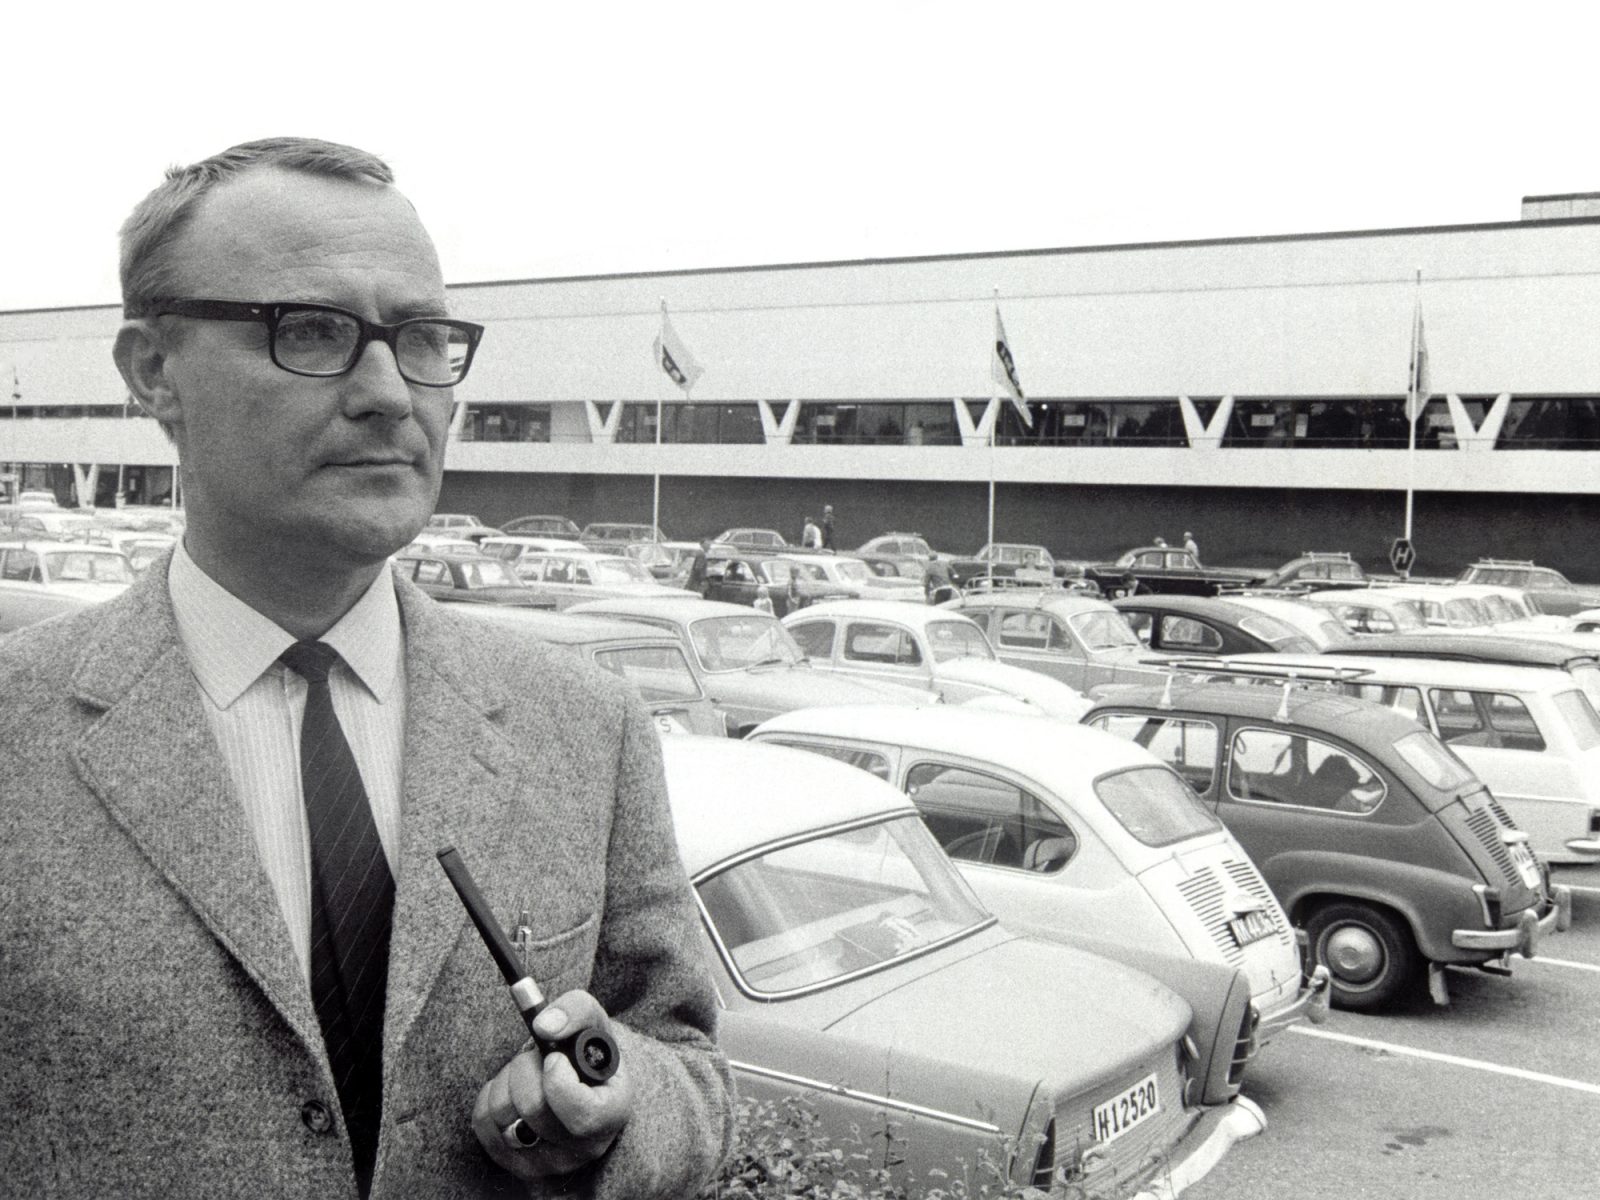 Ingvar Kamprad in tweed jacket stands in front of white building, the first IKEA store, and car park with 1950s cars.